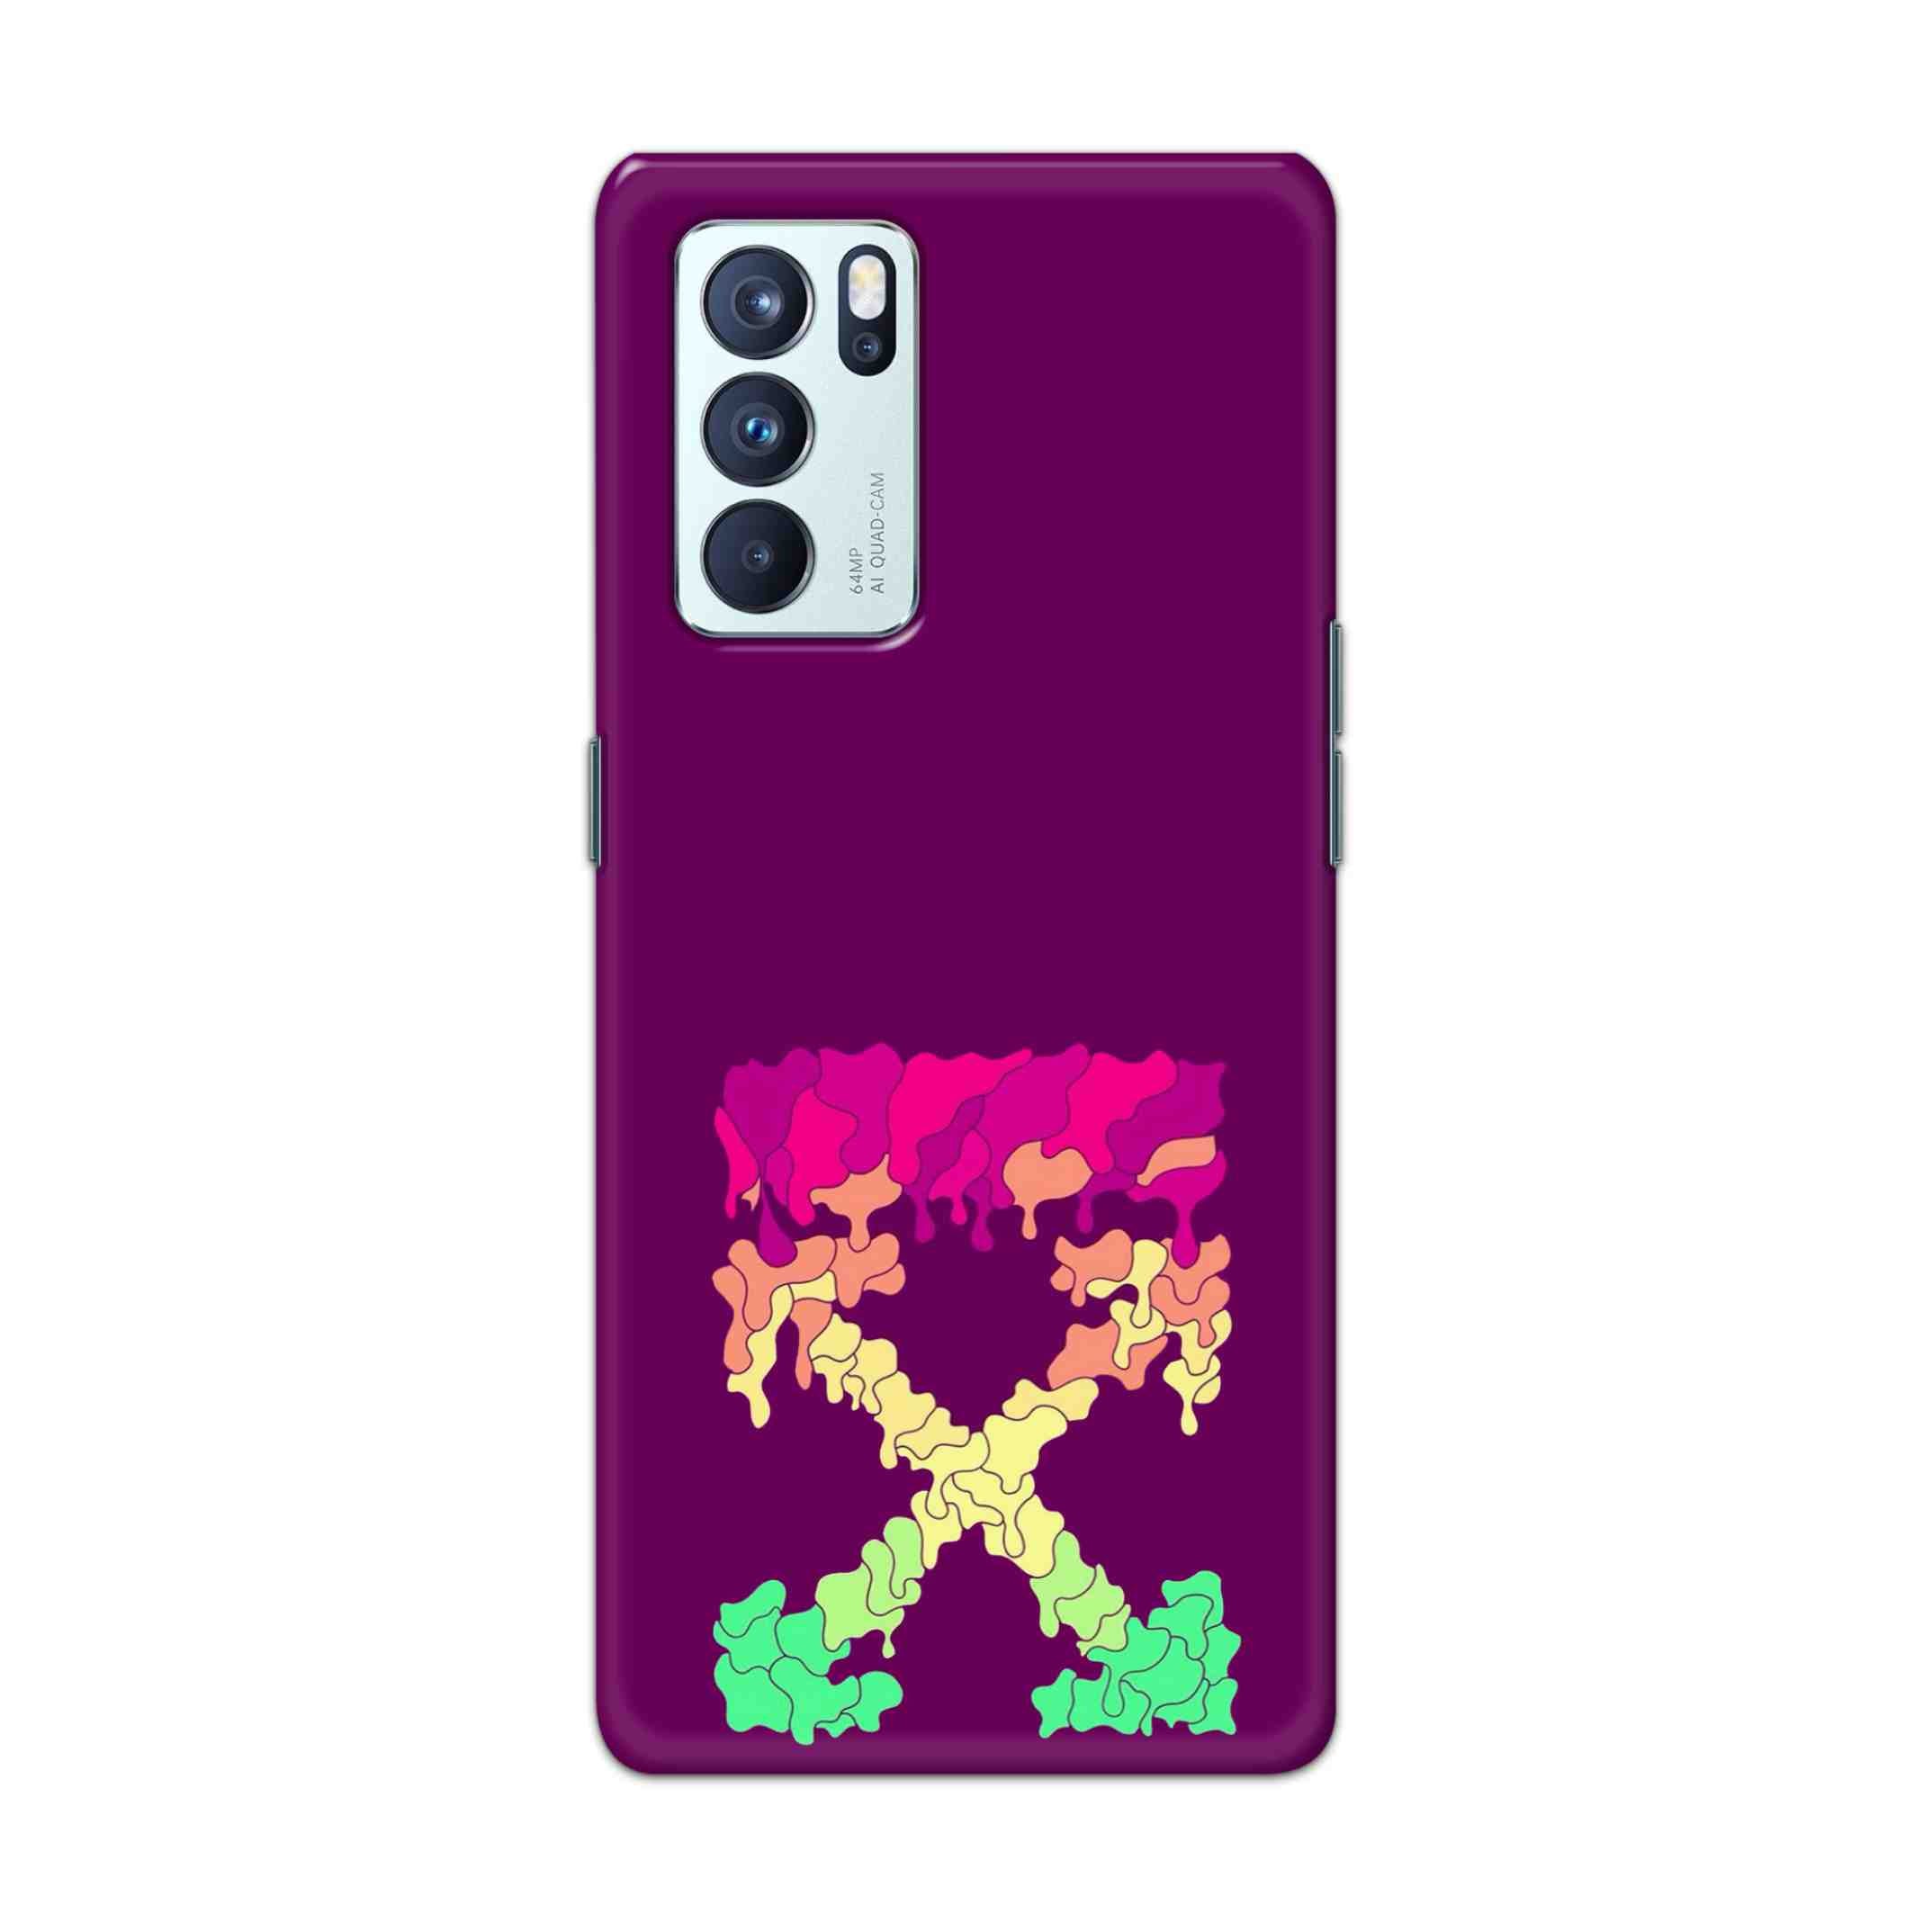 Buy X.O Hard Back Mobile Phone Case Cover For OPPO Reno 6 Pro 5G Online